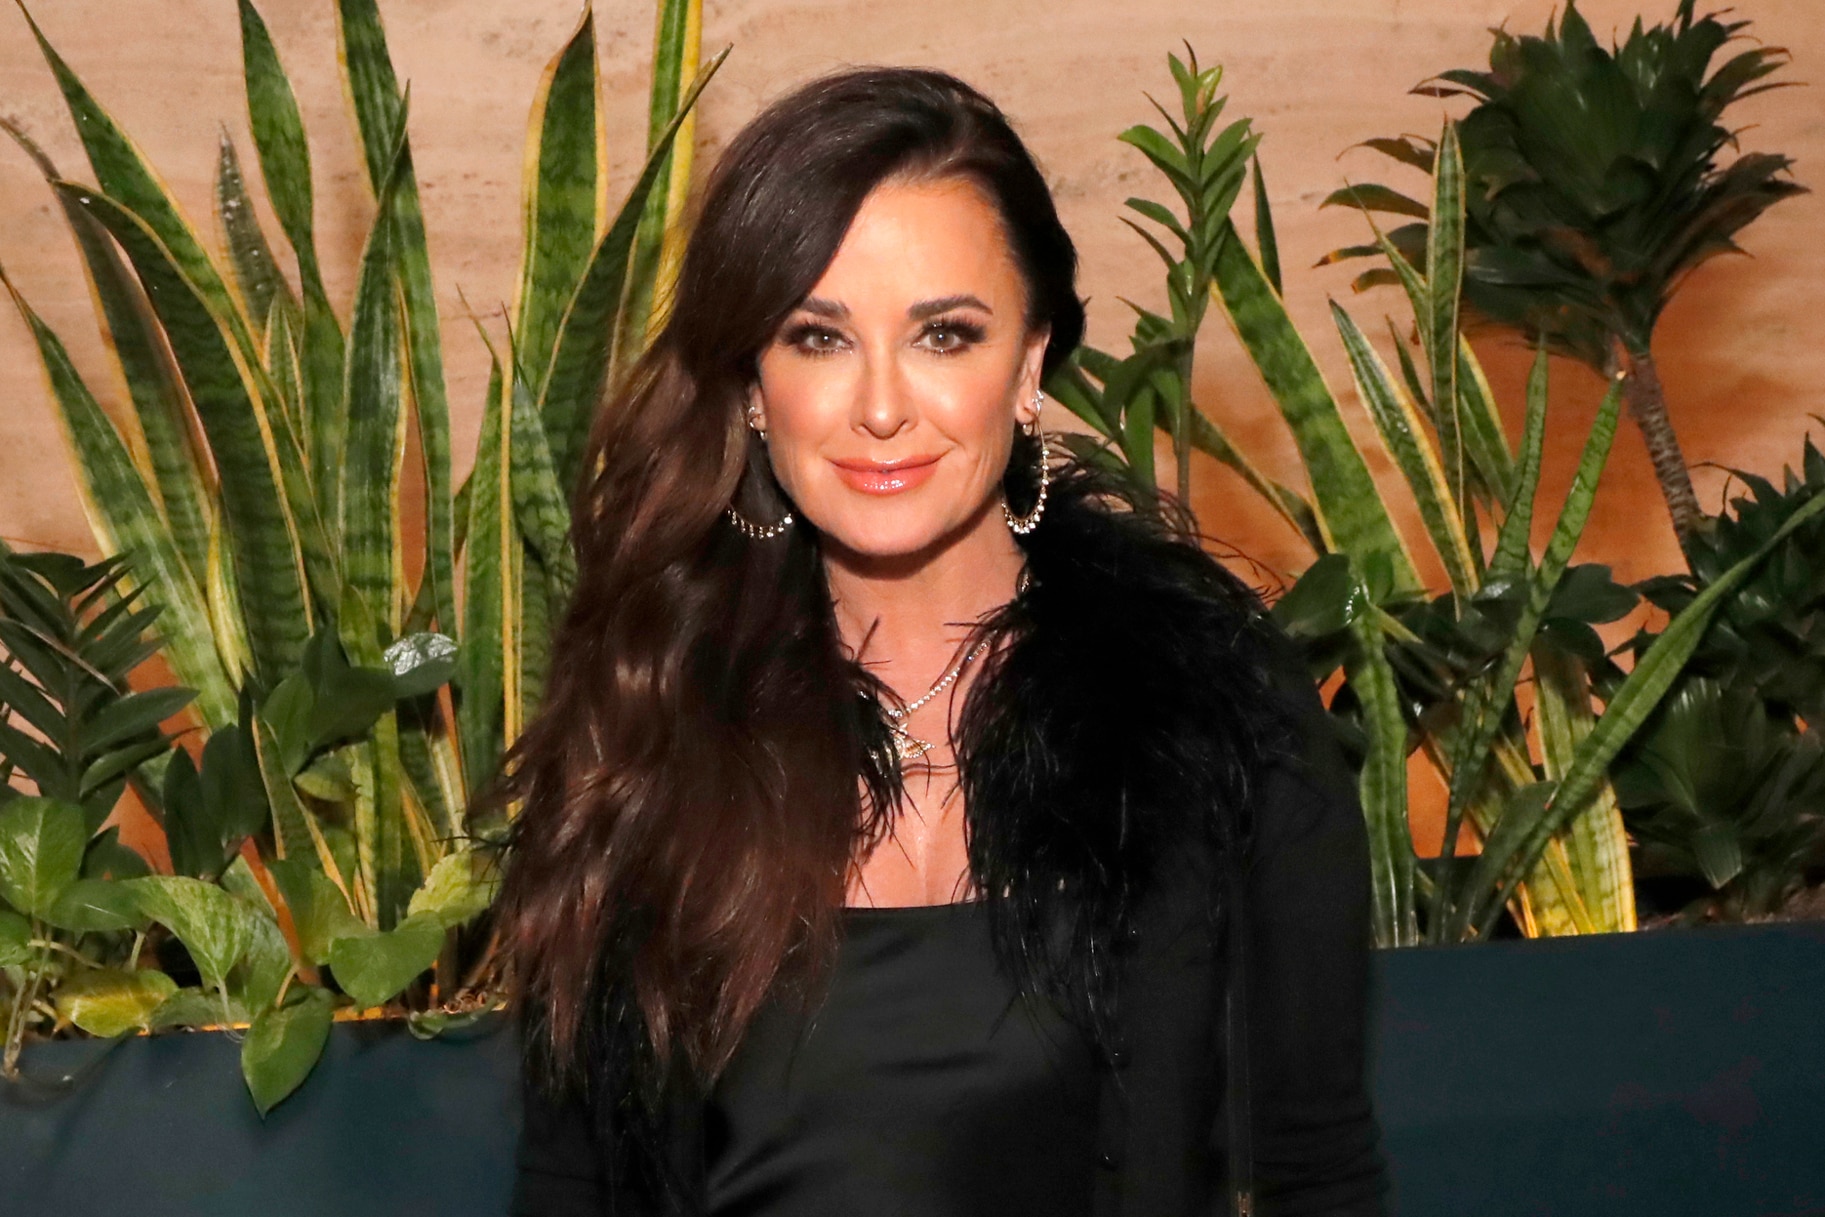 Kyle Richards | The Real Housewives of Beverly Hills